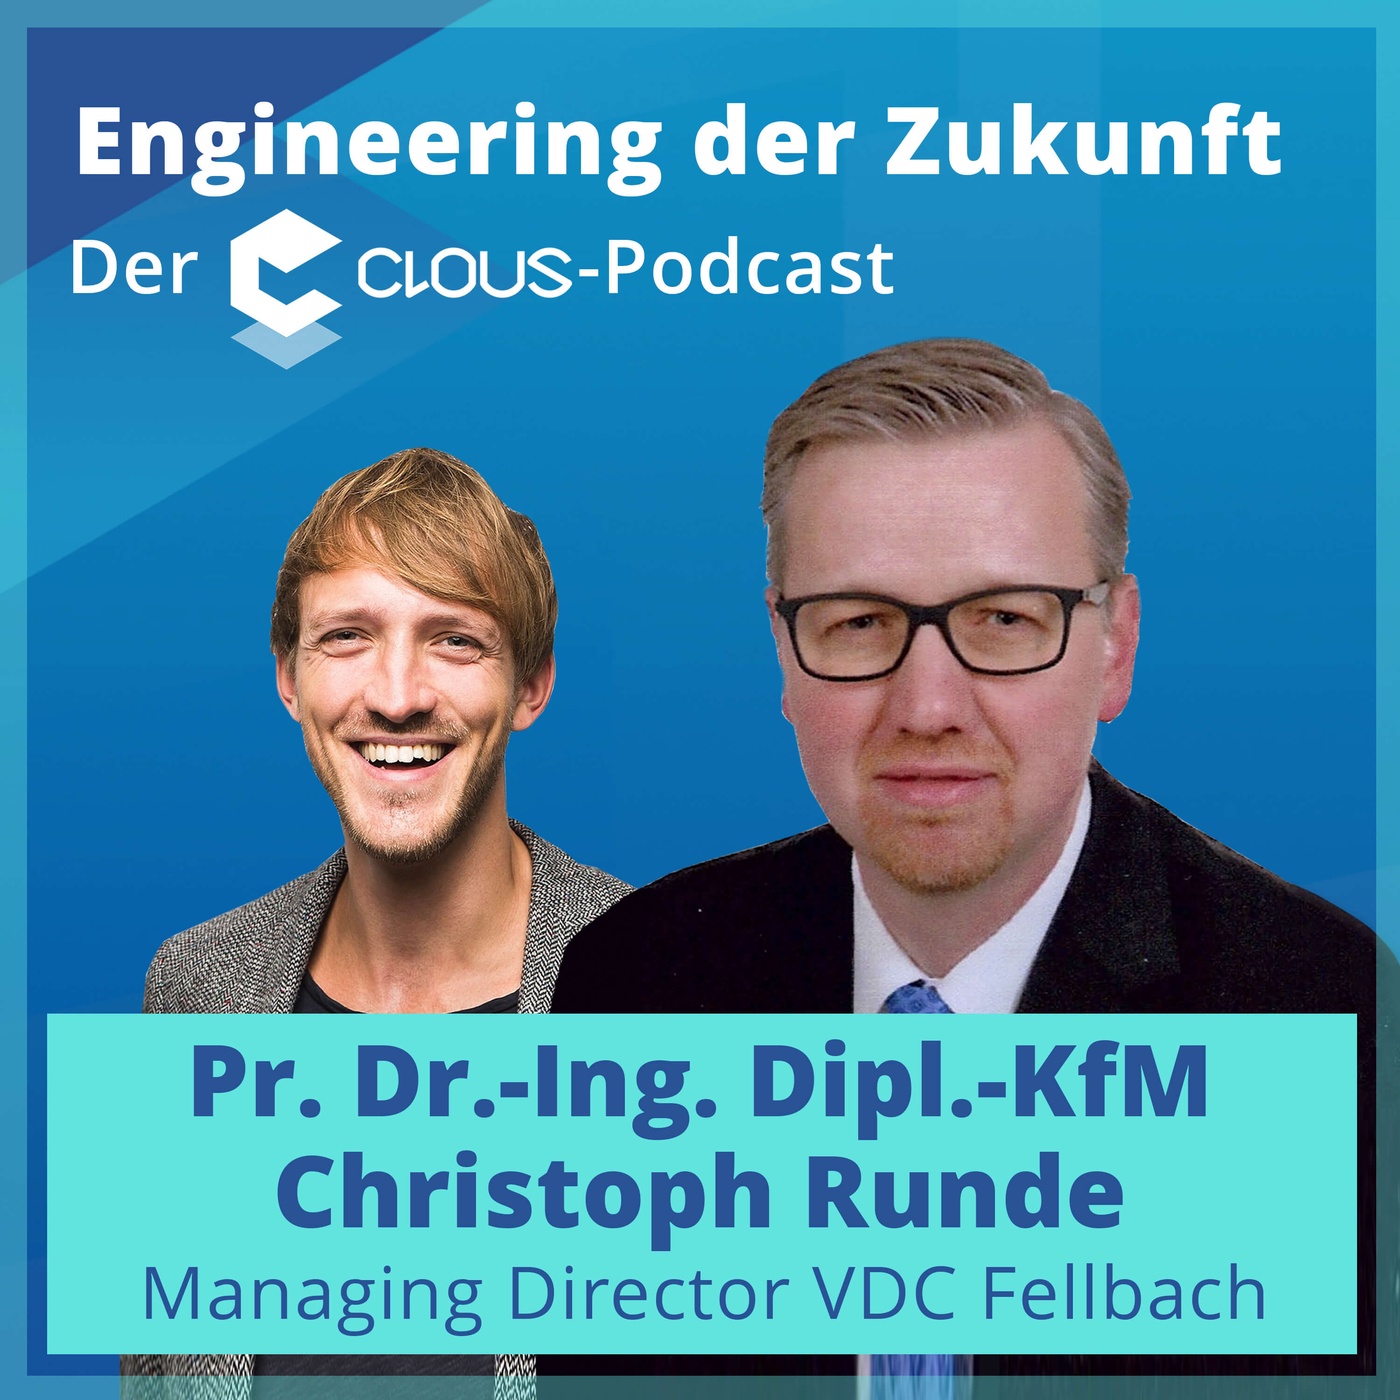 Virtual Reality (VR) und Augmented Reality (AR) in der Industrie (Prof. Dr.-Ing. Dipl.-Kfm. Christoph Runde)